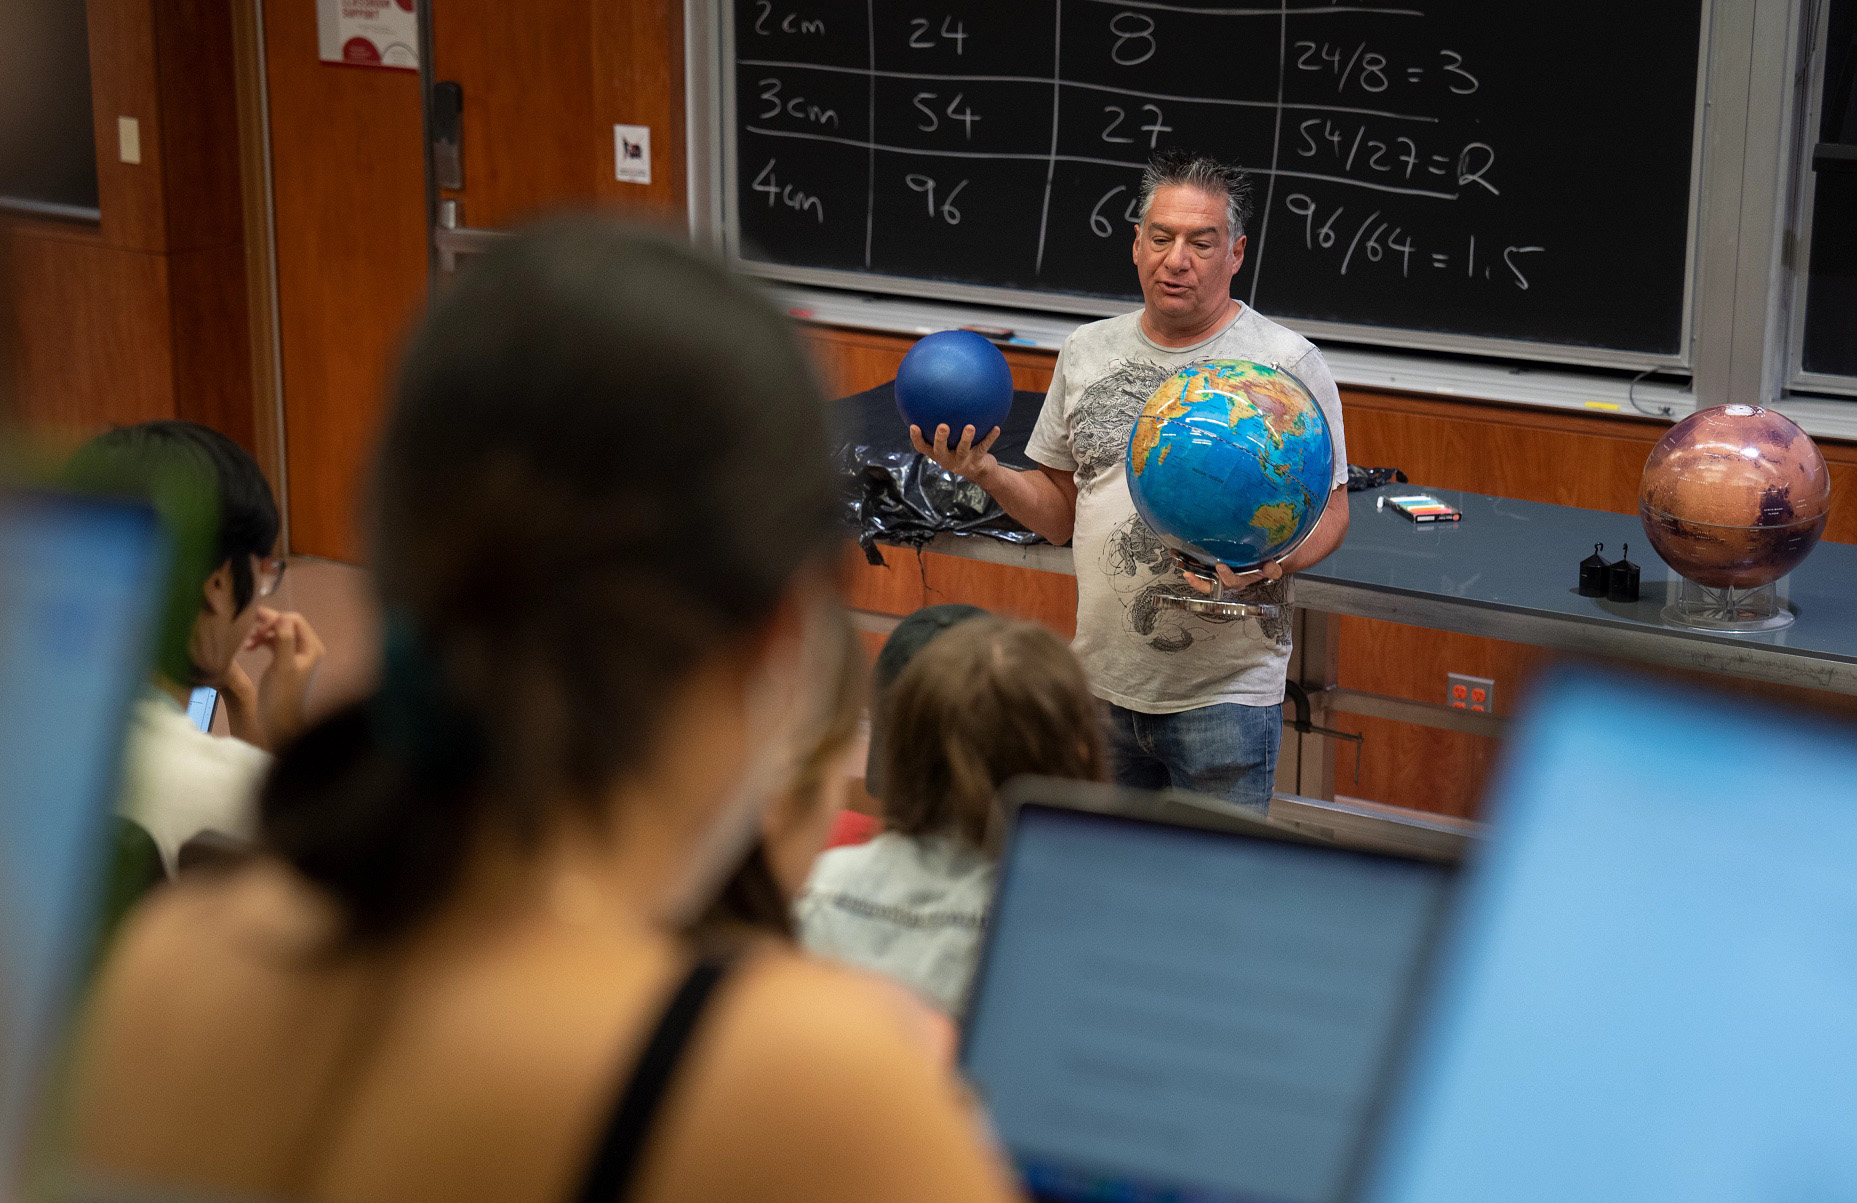  In PHYS 100, students learn from Prof. Vahe Peroomian about the structure and beauty of physical laws and their manifestations.